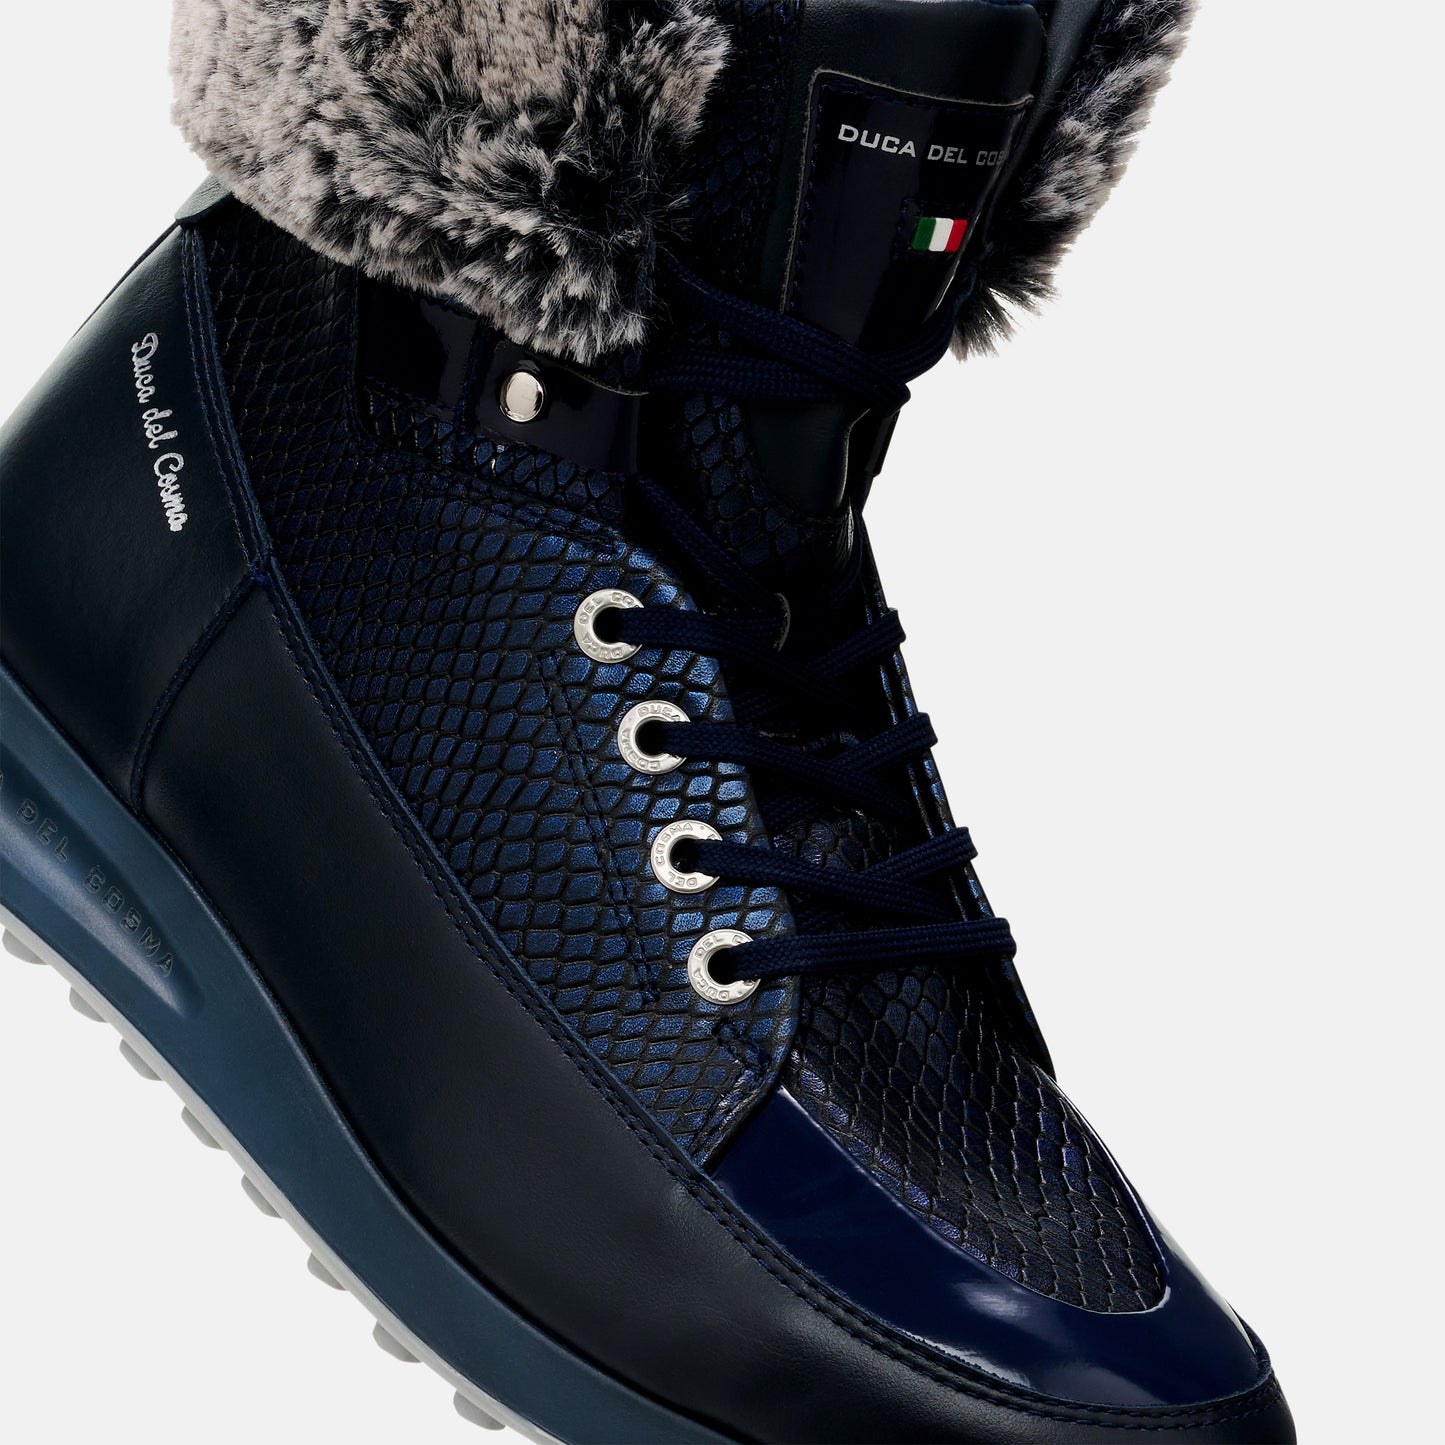 Francesca Blue women's winter golf shoe are waterproof and warm golf boots with maximum grip